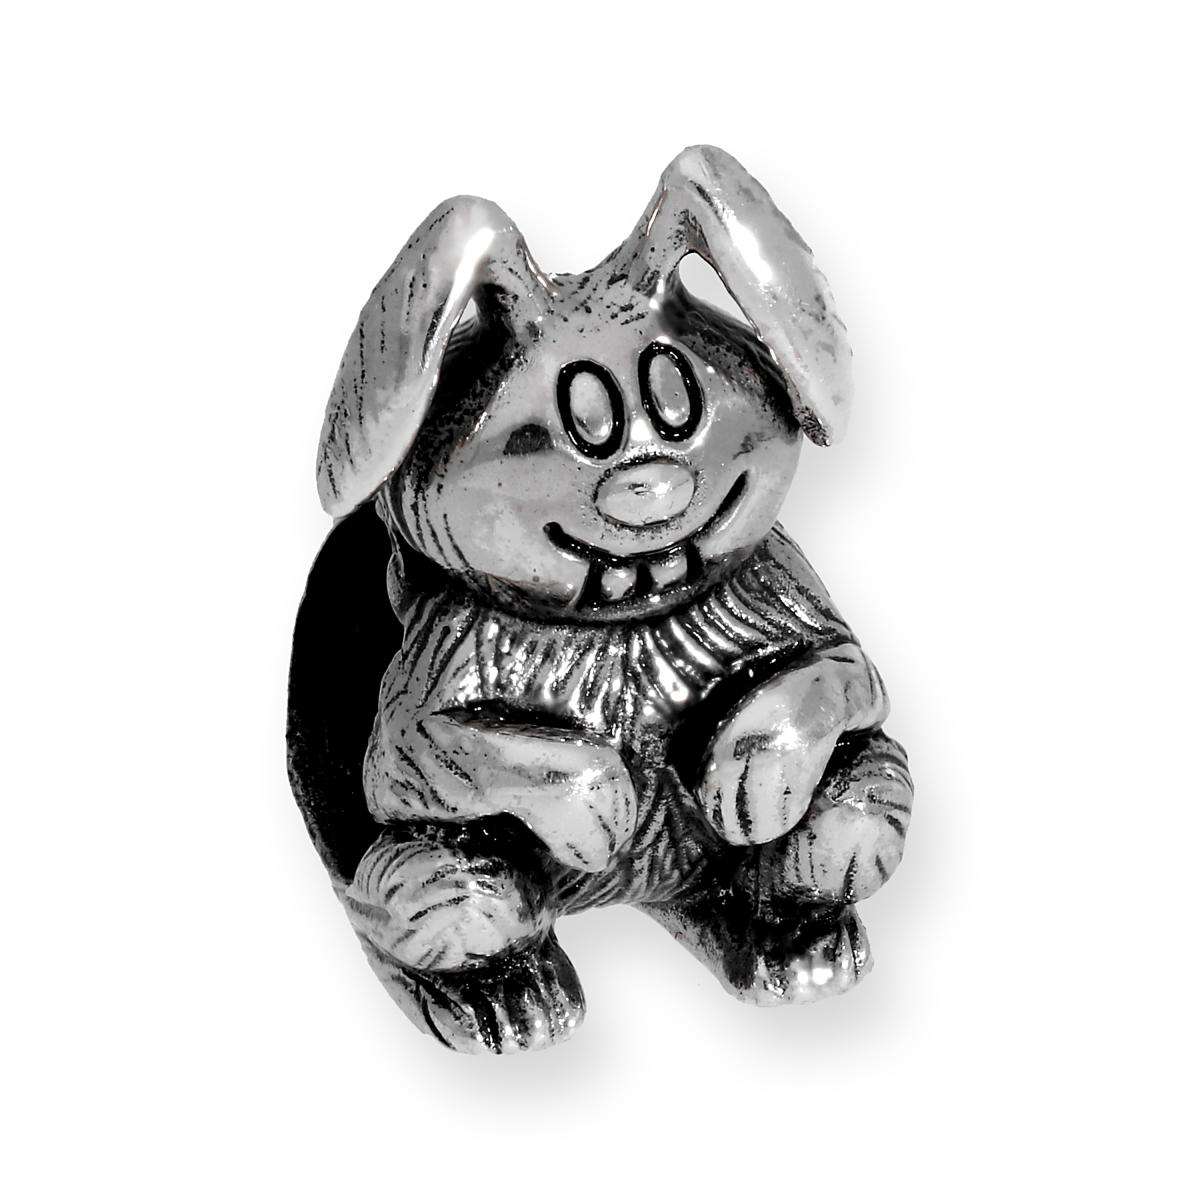 Best Price Of 926 Silver Wholesale Charm |Design Hare Bead Charm|